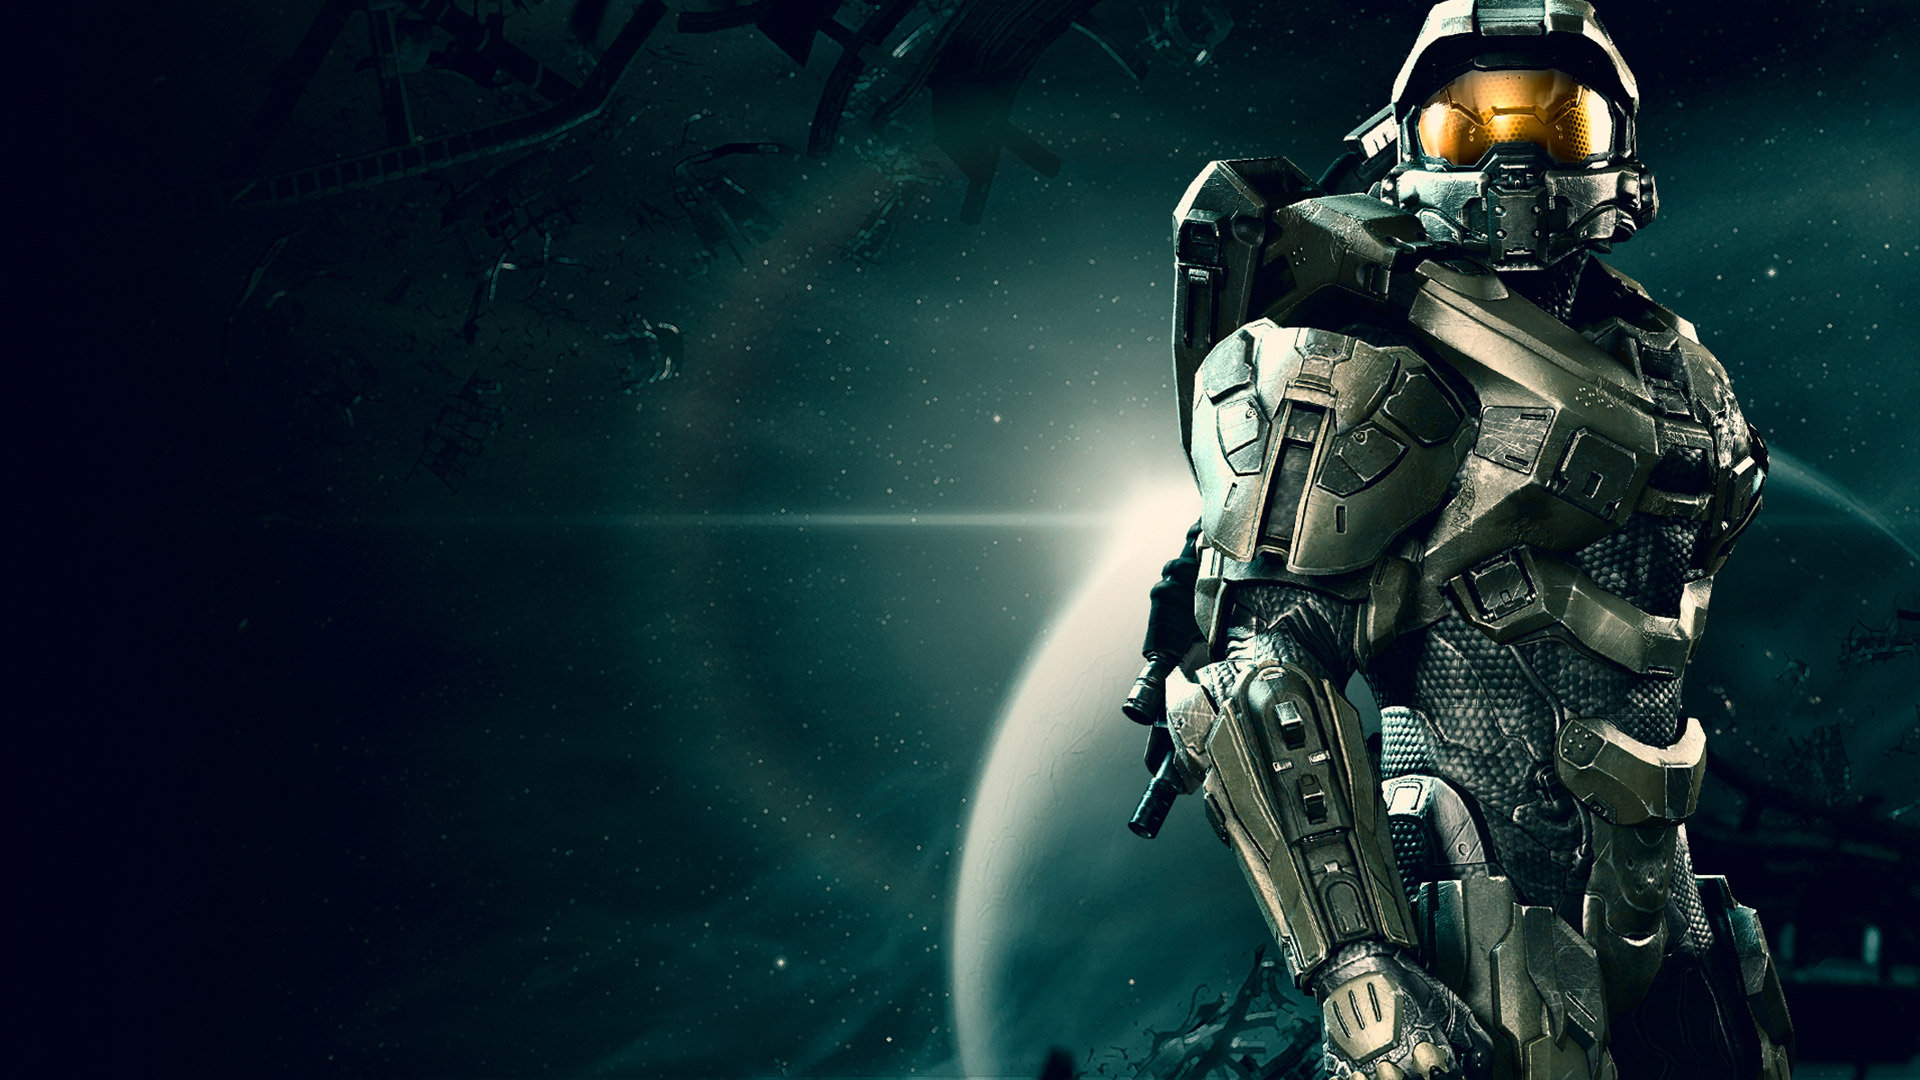 Master Chief Res: 1920x1080 HD / Size:723kb. Views: 116568. More HALO wallpapers